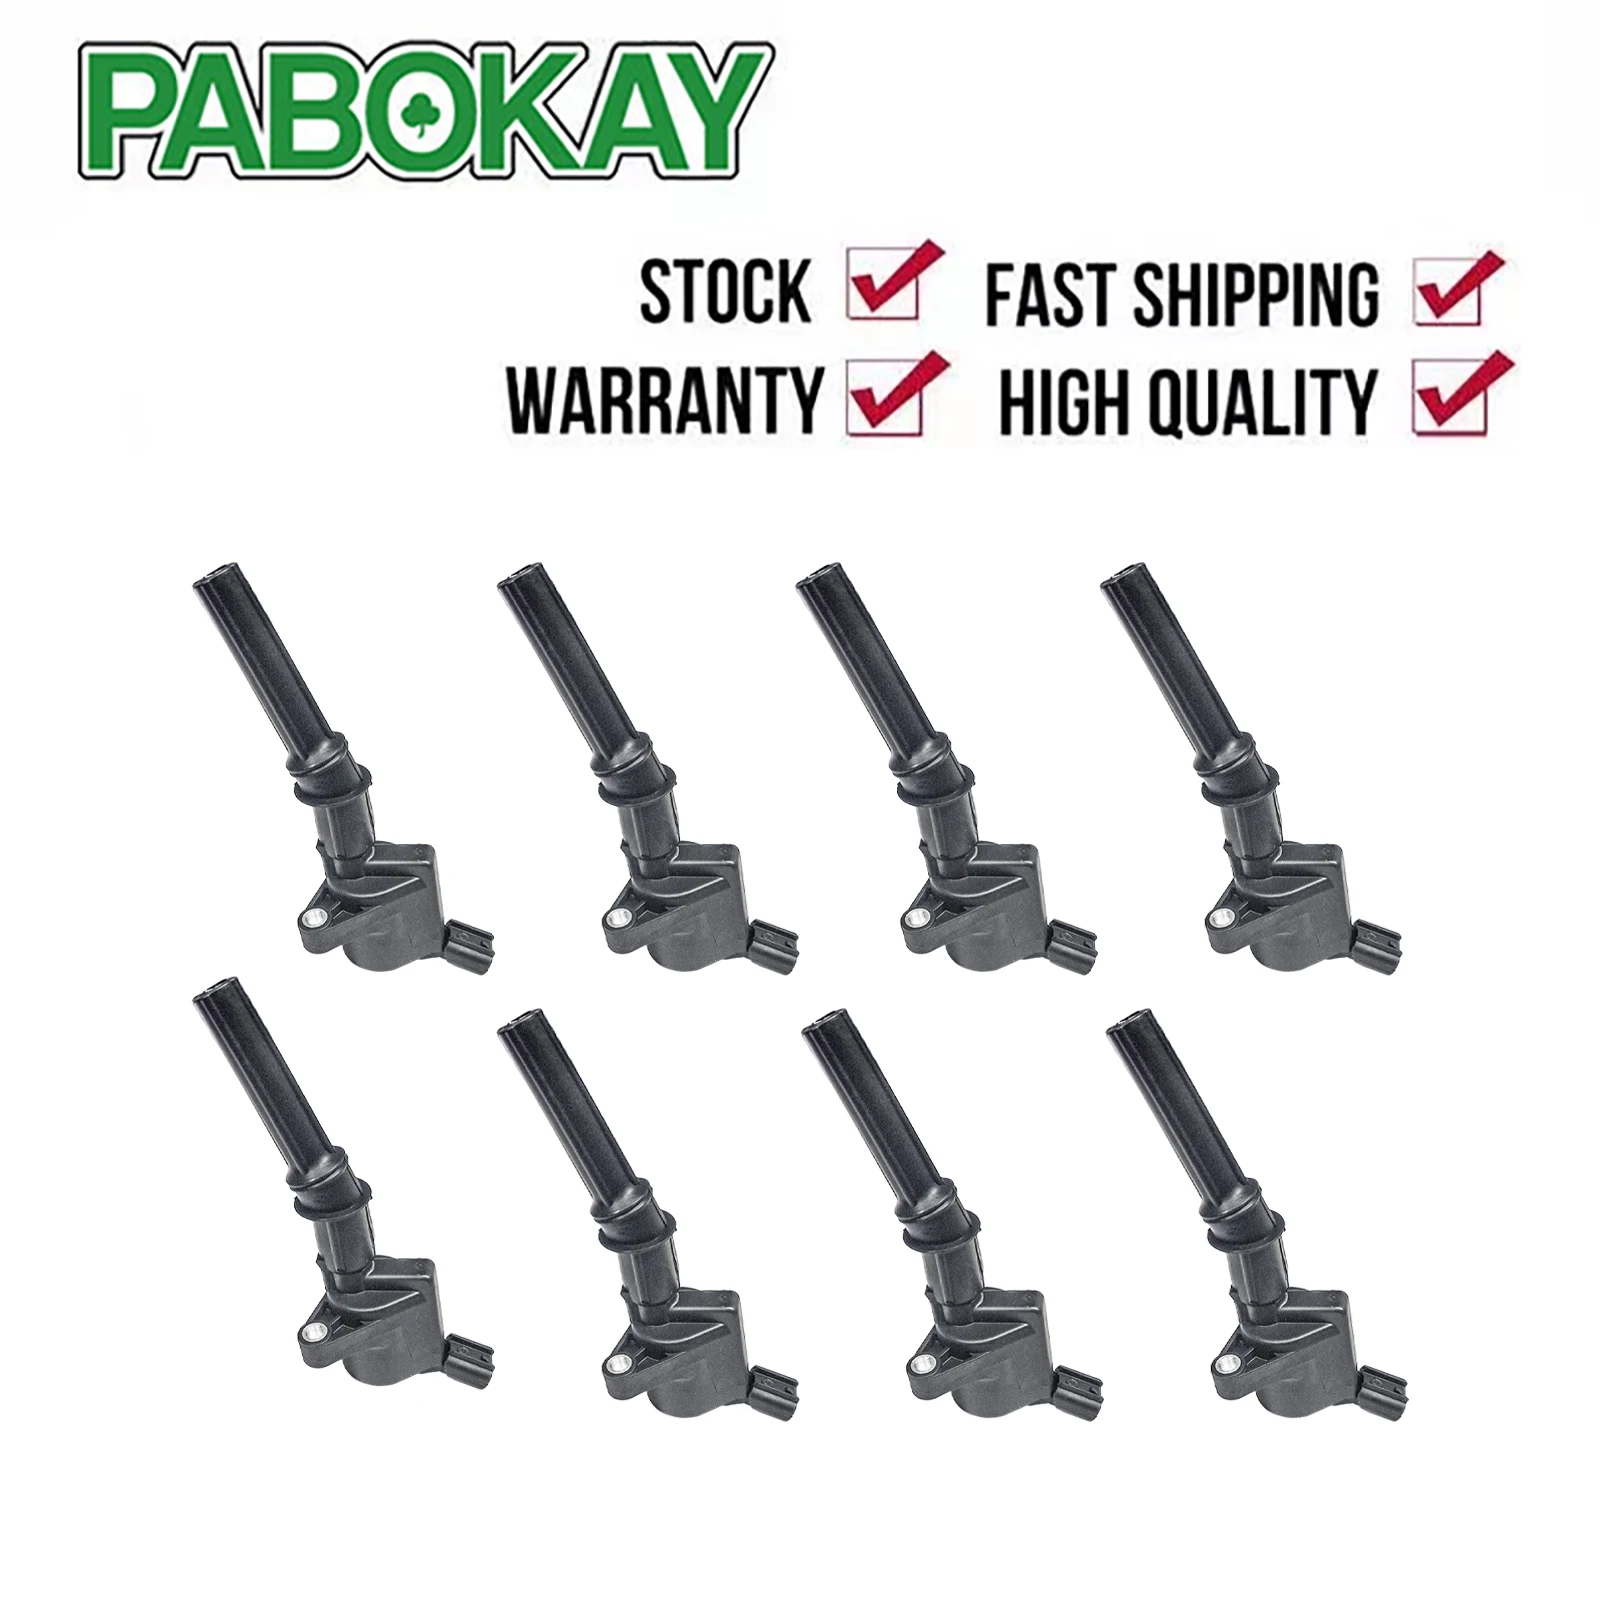 

8 pieces x New Complete ignition coils for Ford Lincoln Mercury DG508 SET OF 8 4.6L 5.4L V8 3W7E-12A366-AA F7TZ-12029-AB DG491